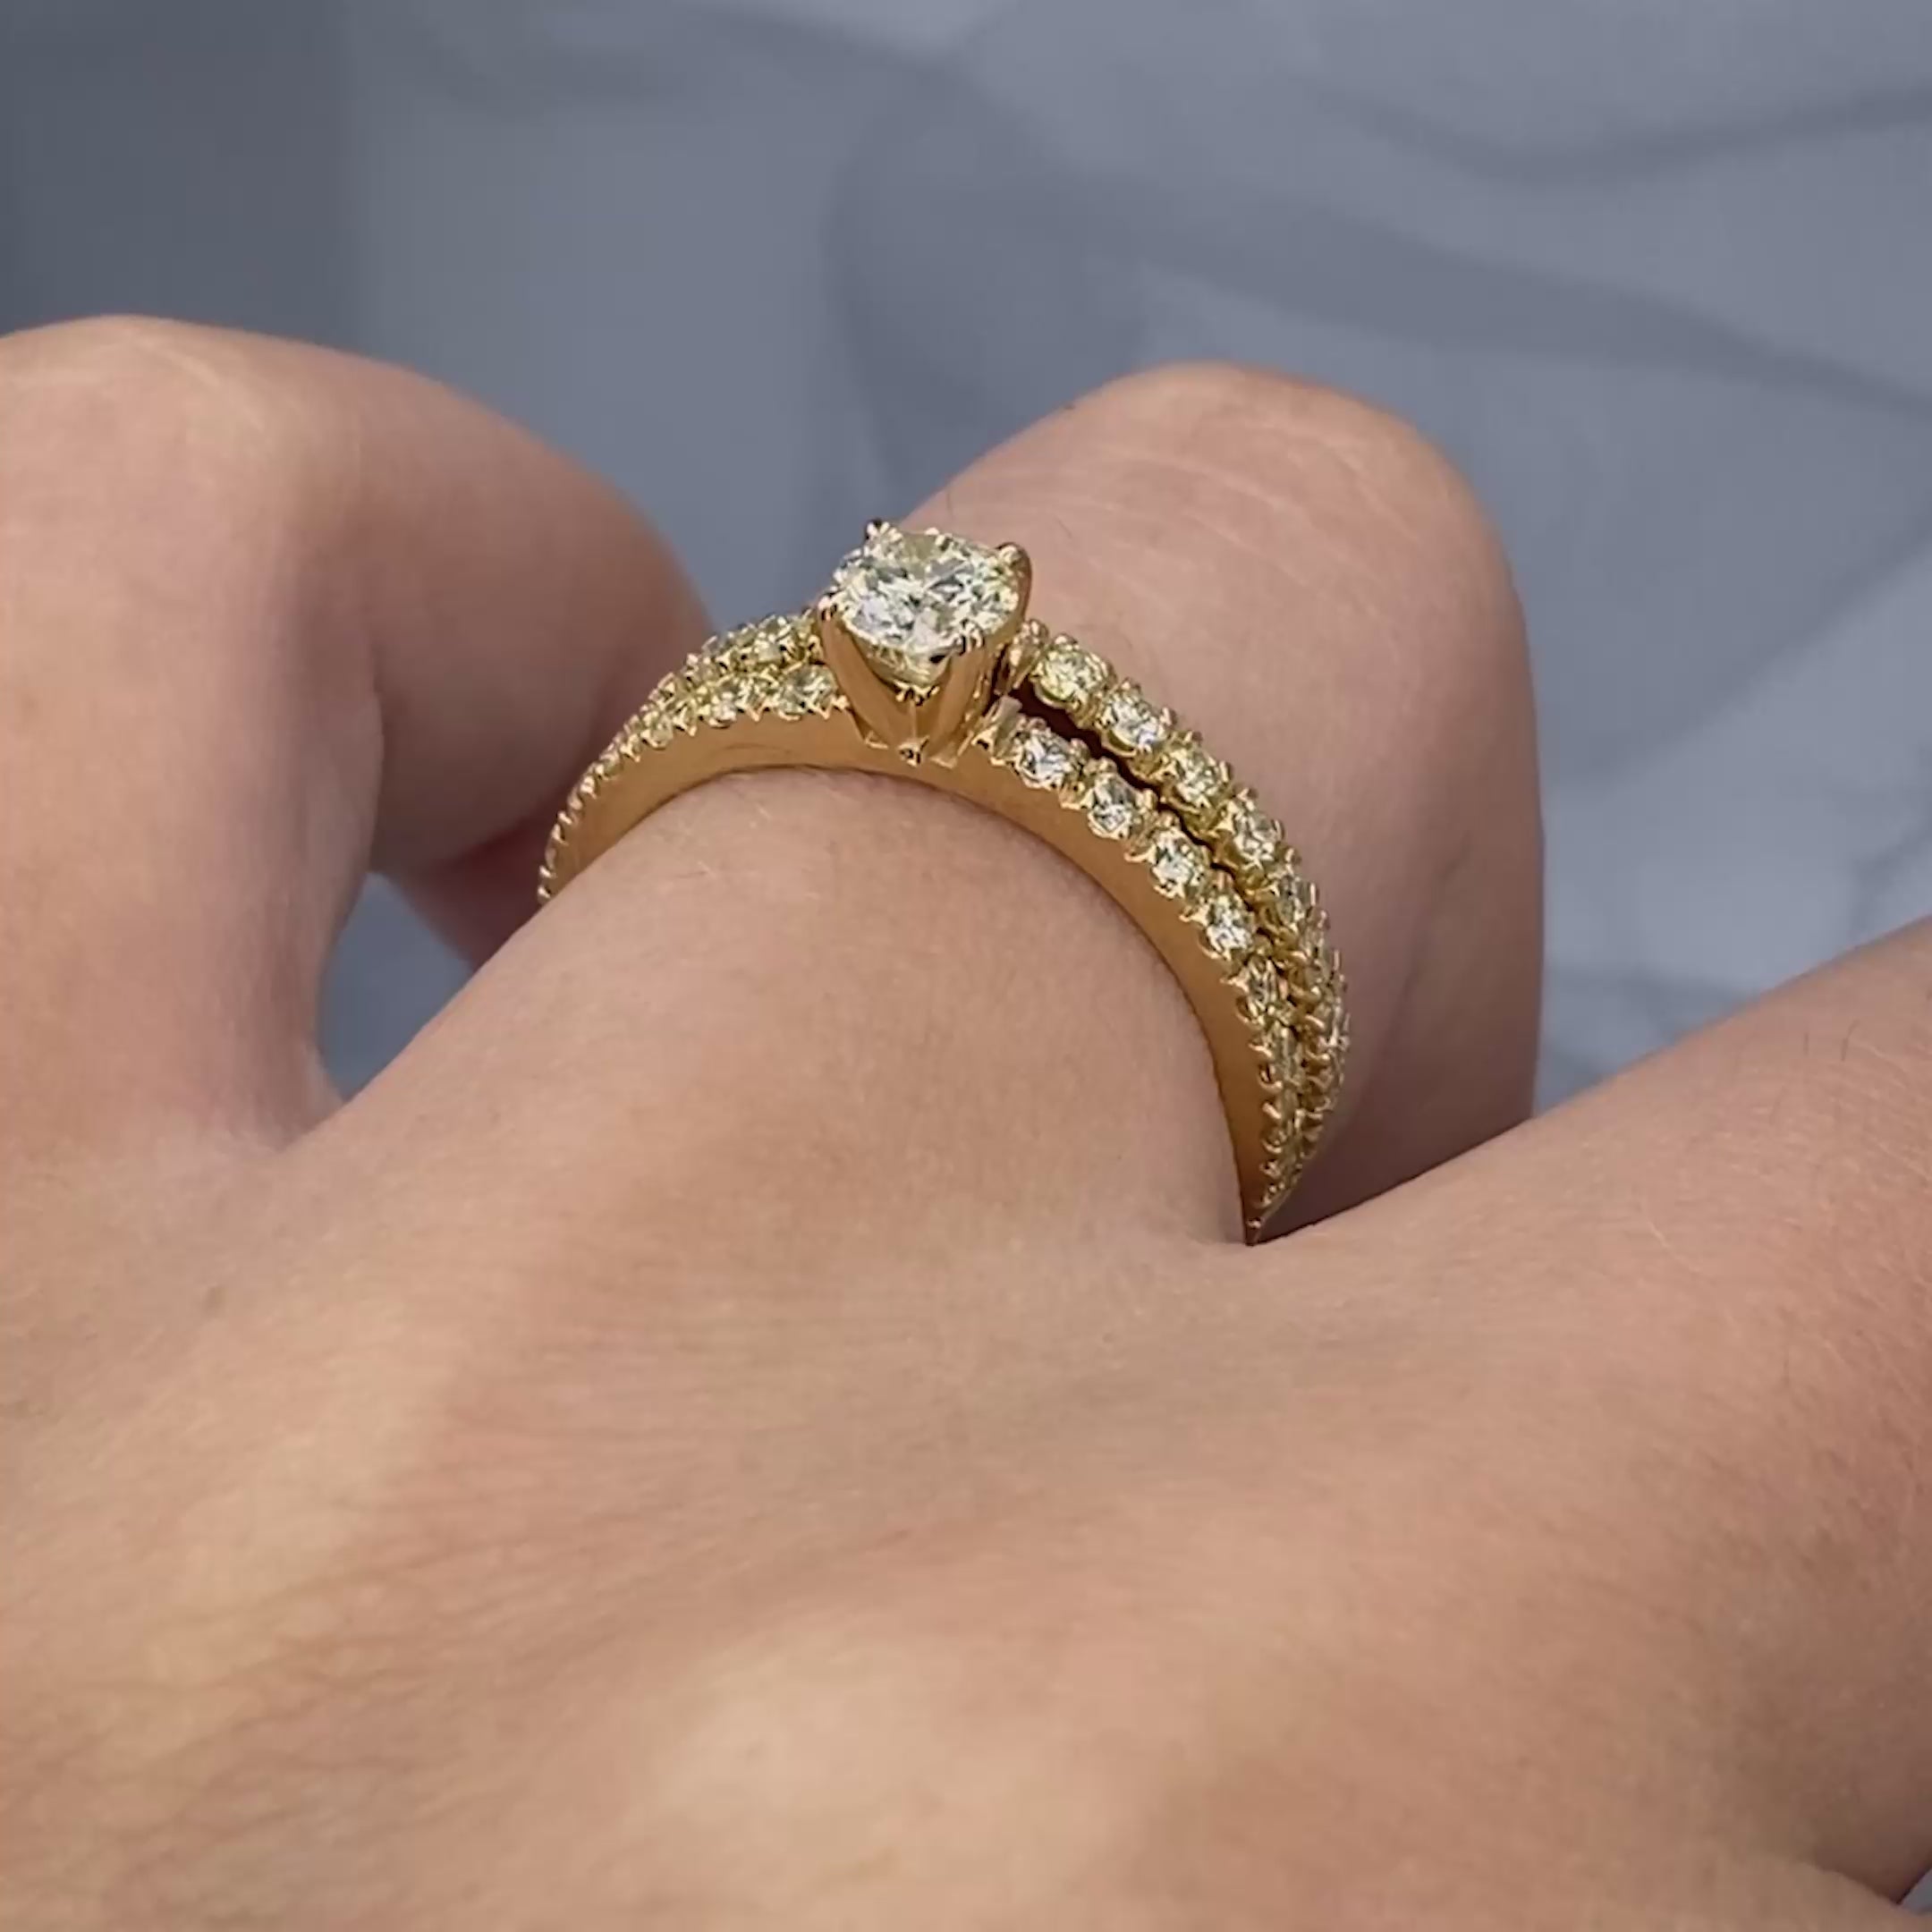 Exquisite 1.20CT Round Cut Diamond Bridal Set in 14KT Yellow Gold